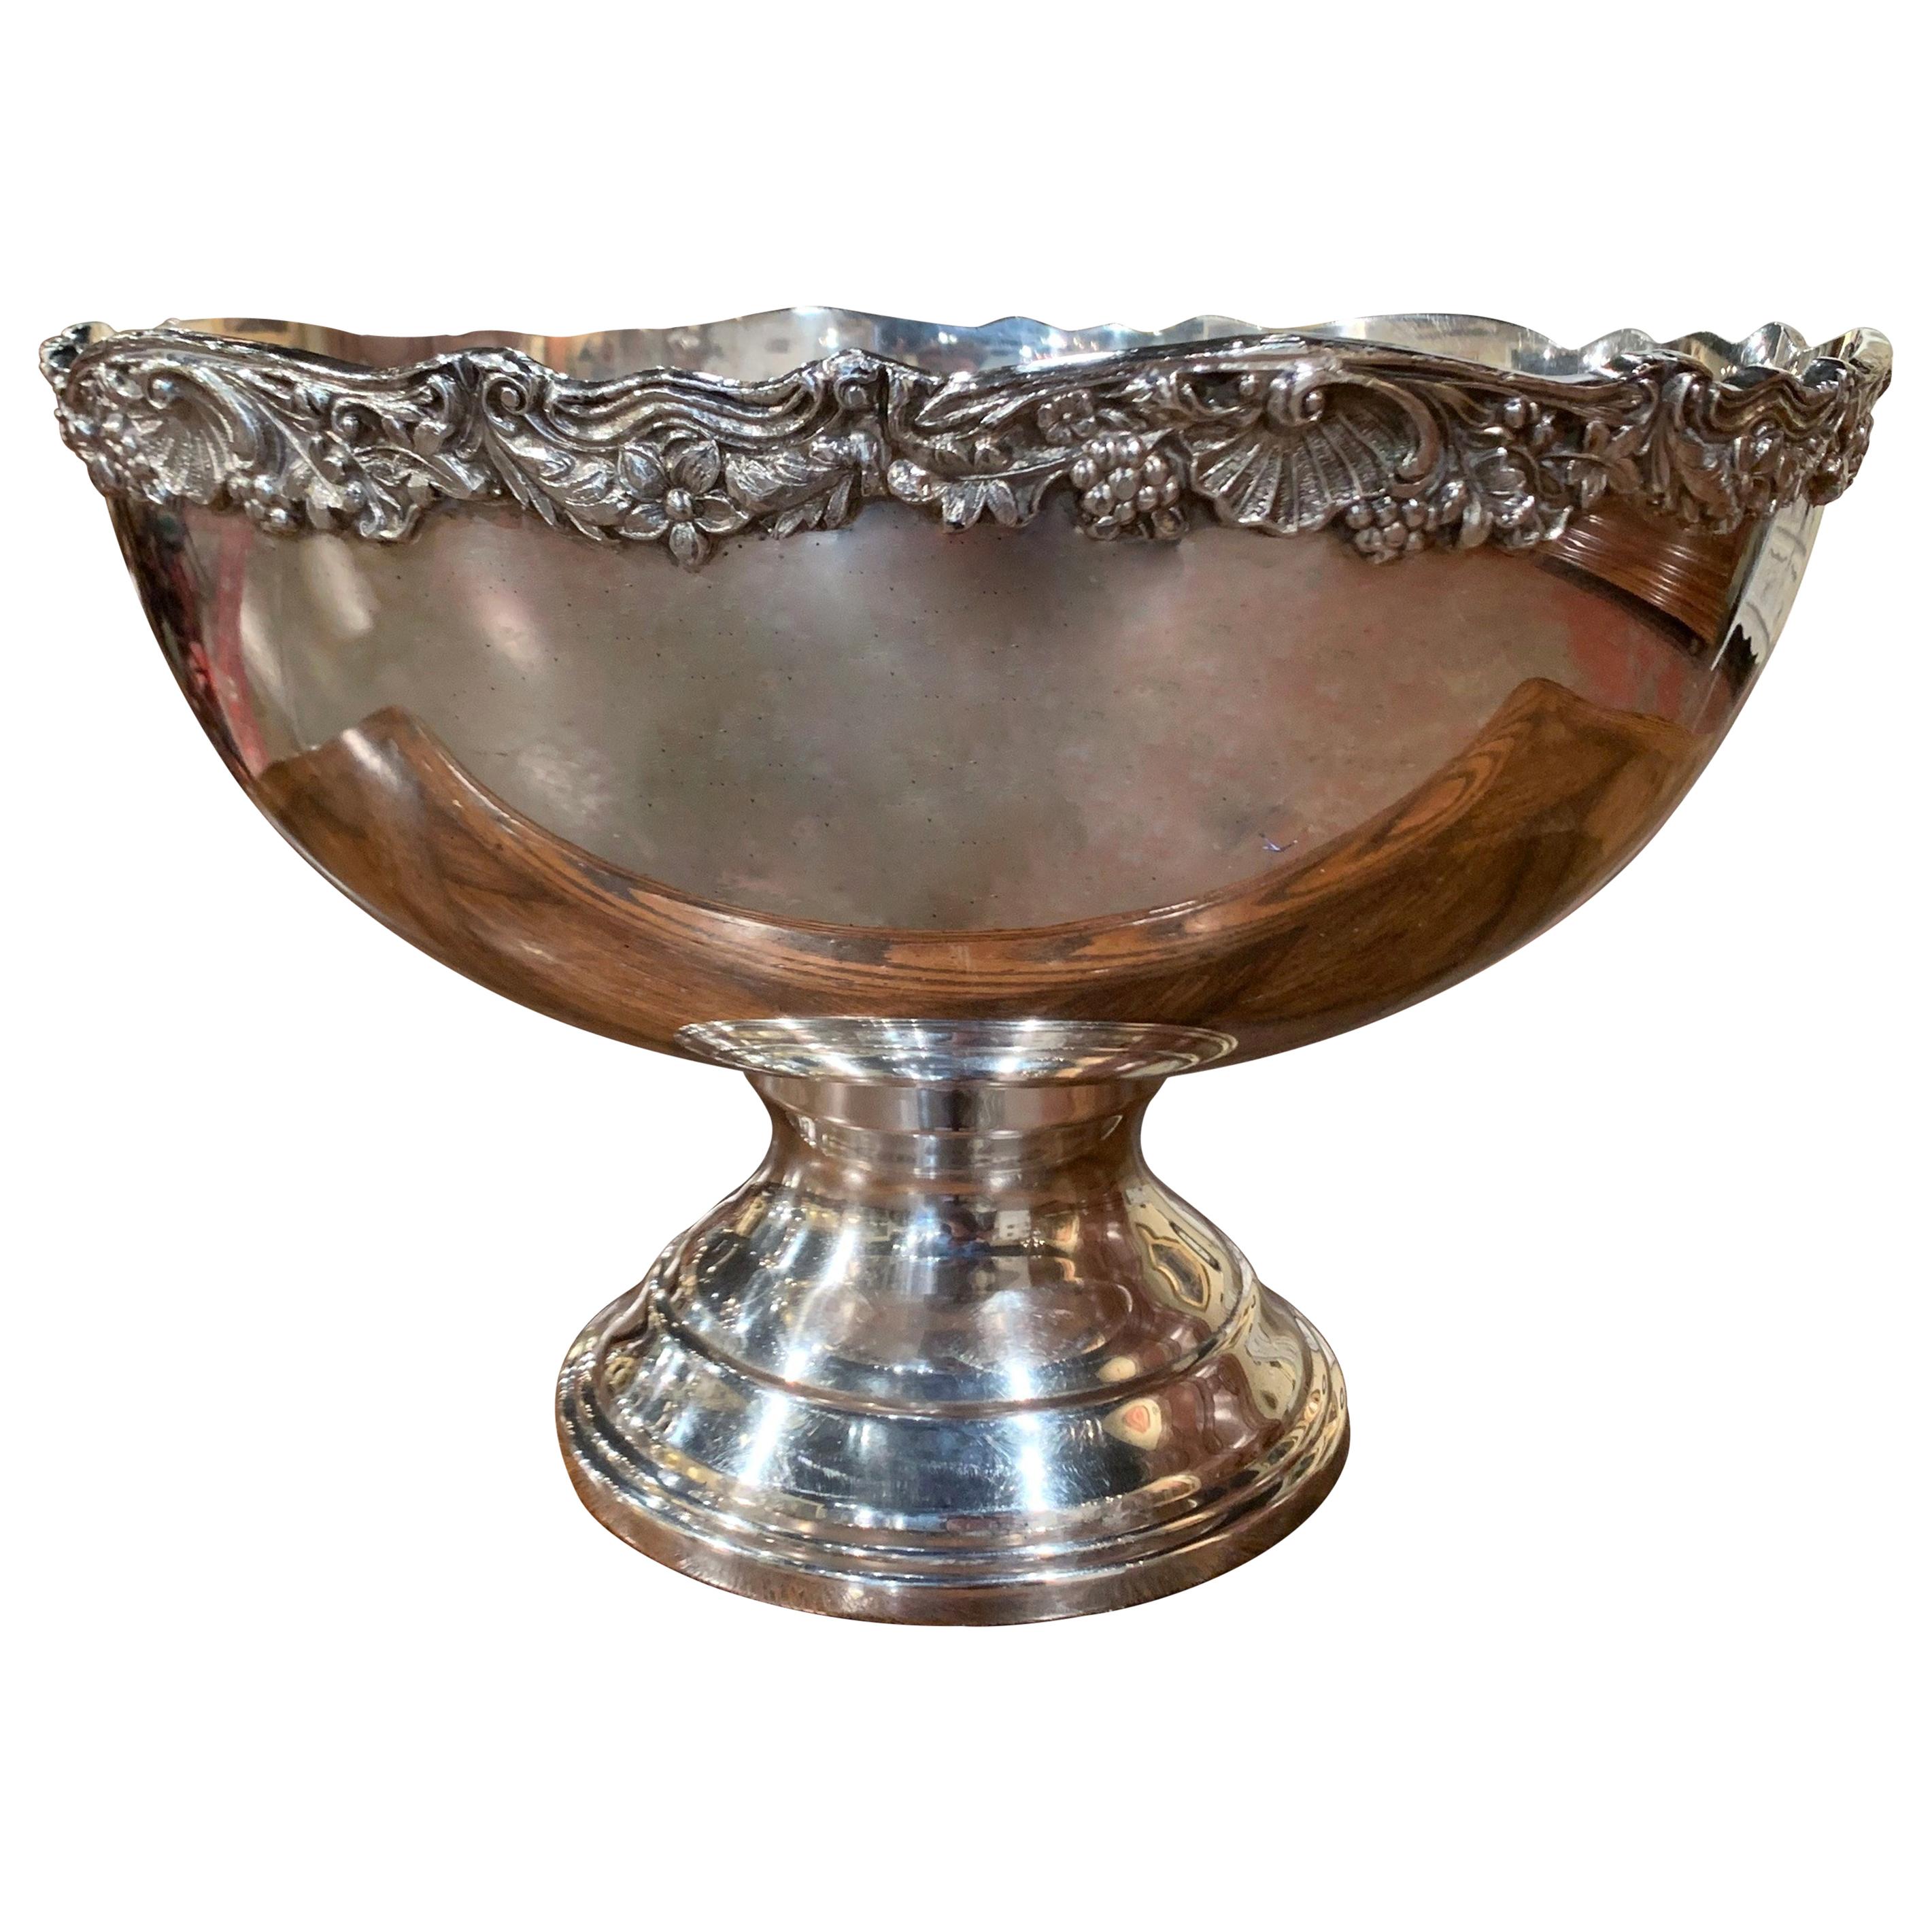 Mid-20th Century French Silver Plated Wine Cooler Bowl with Grape & Floral Decor